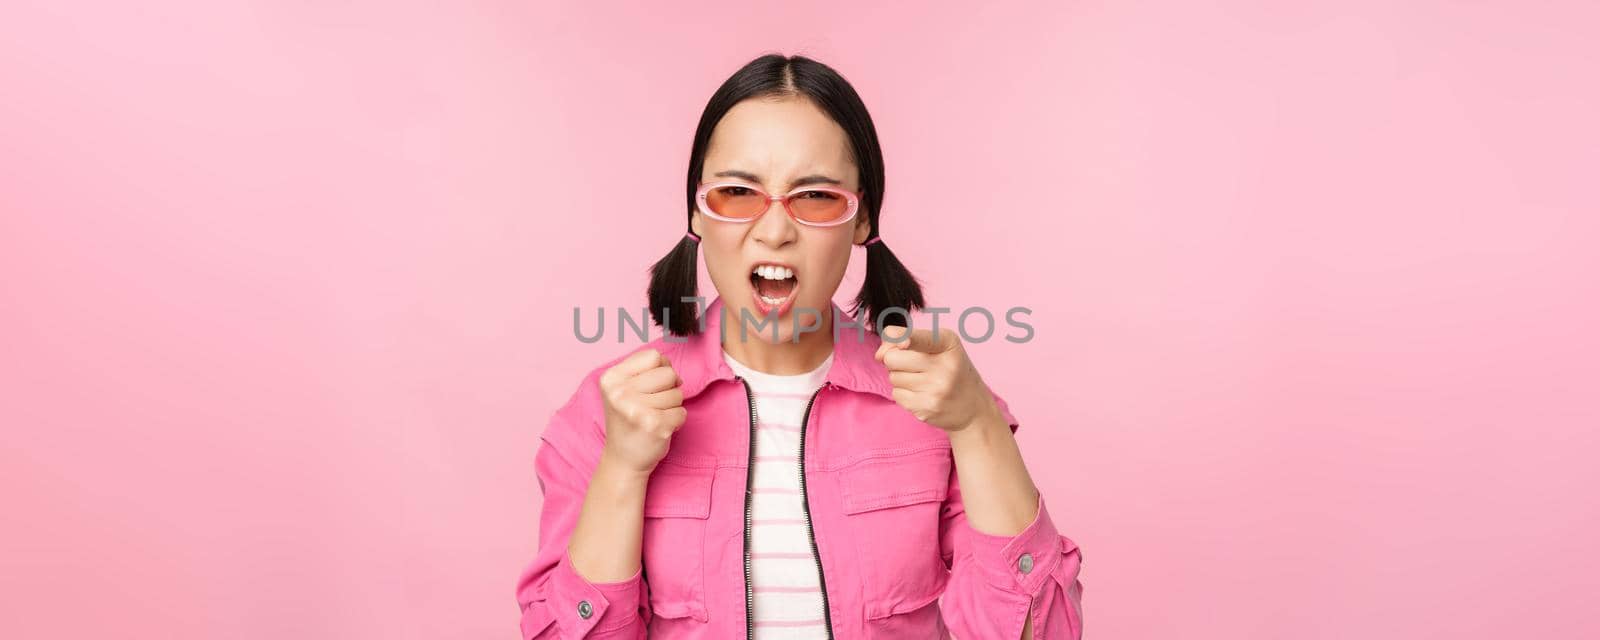 Image of angry, pissed off korean adult female model, shaking fists and shouting, screaming outraged, standing over pink background.